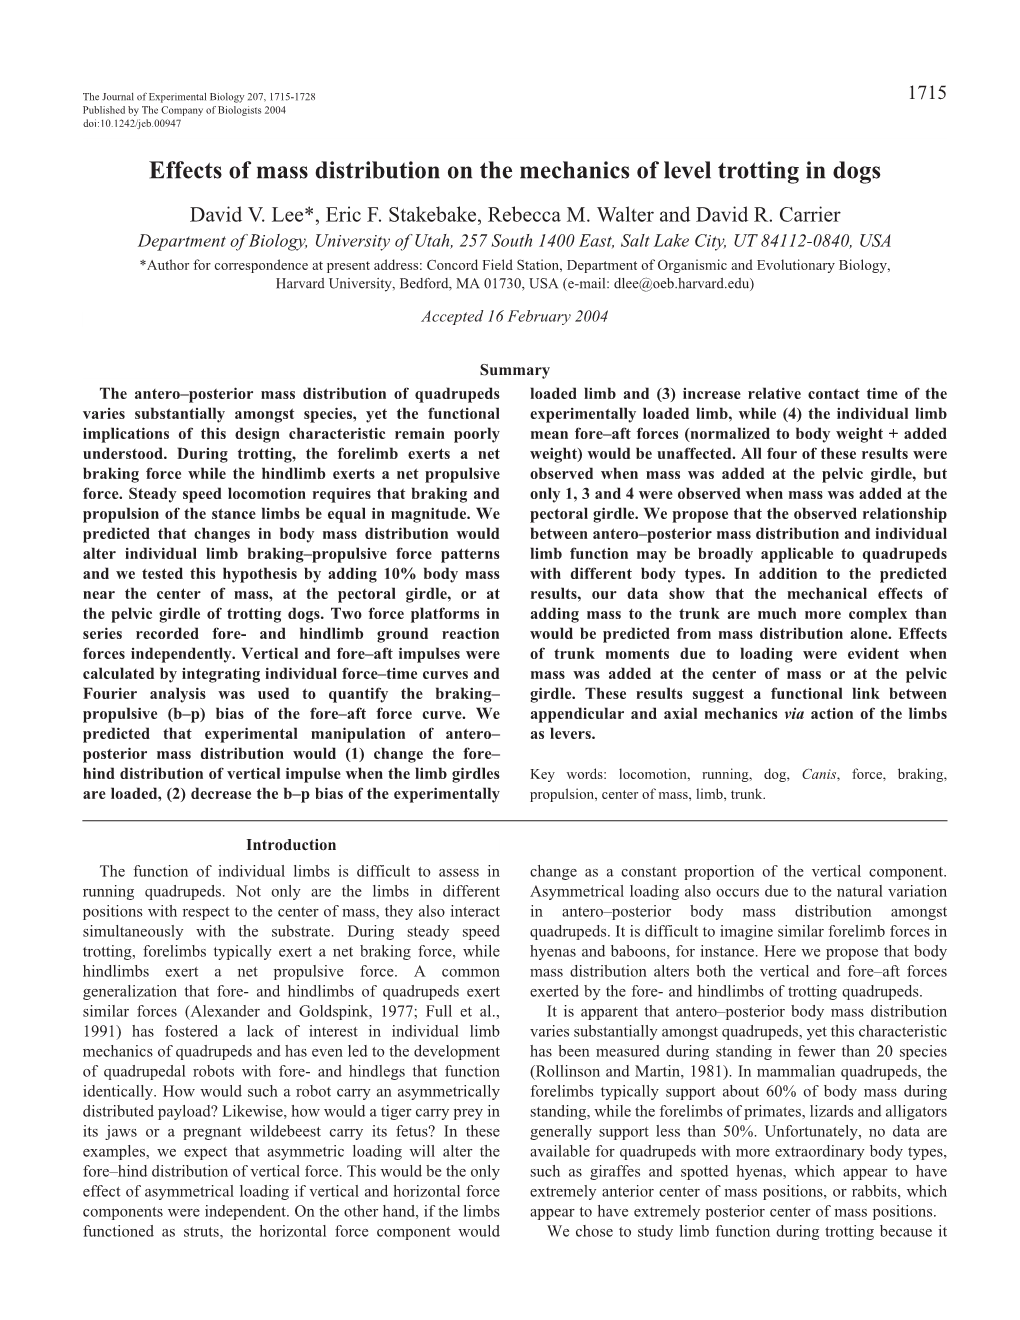 Effects of Mass Distribution on the Mechanics of Level Trotting in Dogs David V